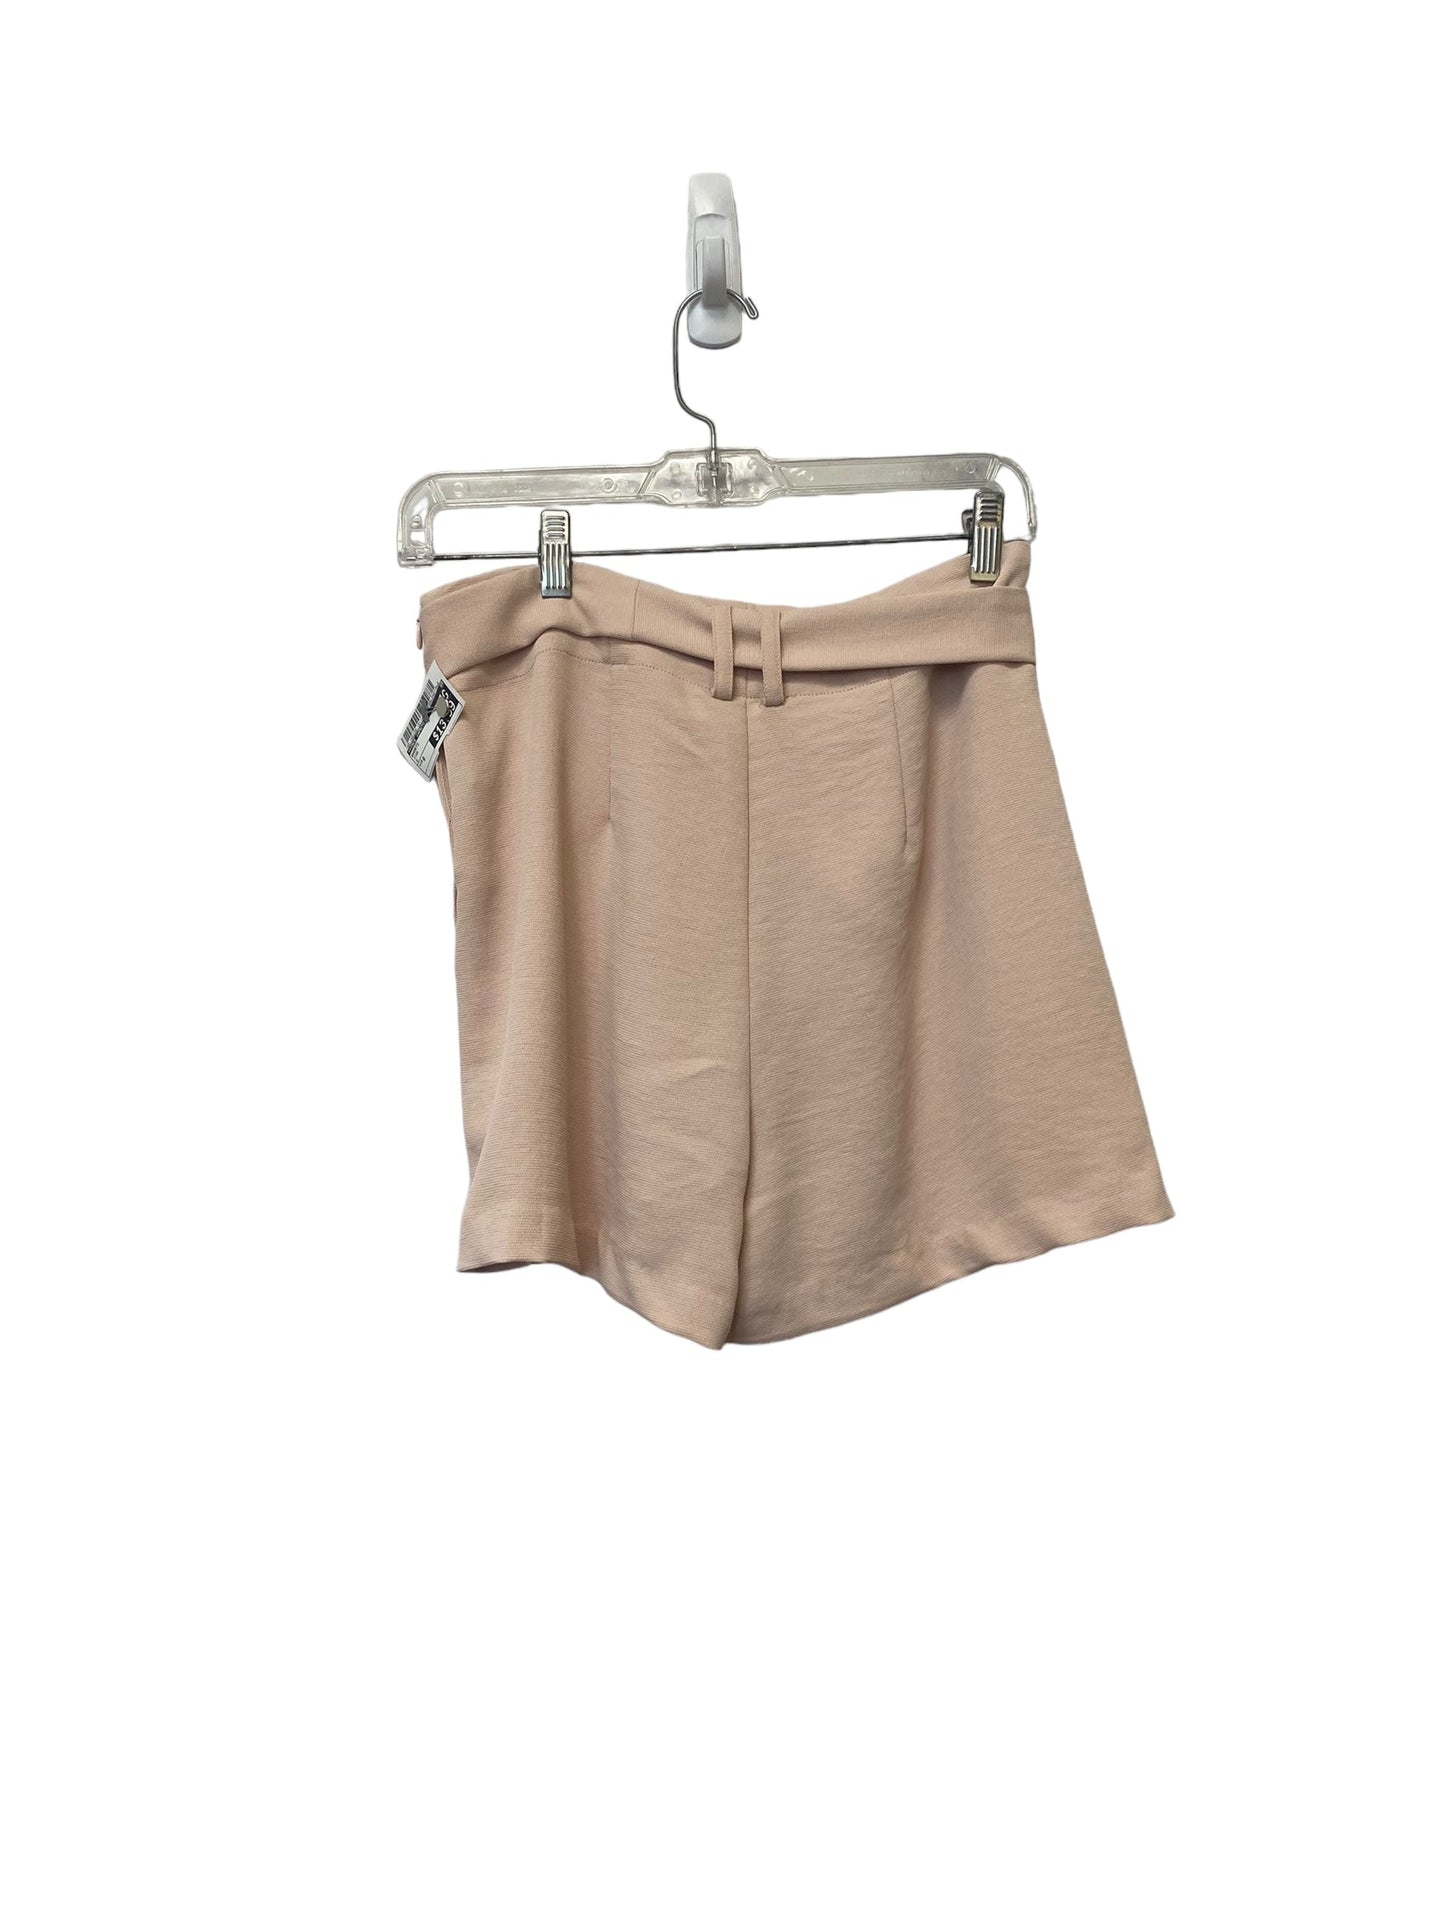 Pink Shorts Vince Camuto, Size 0